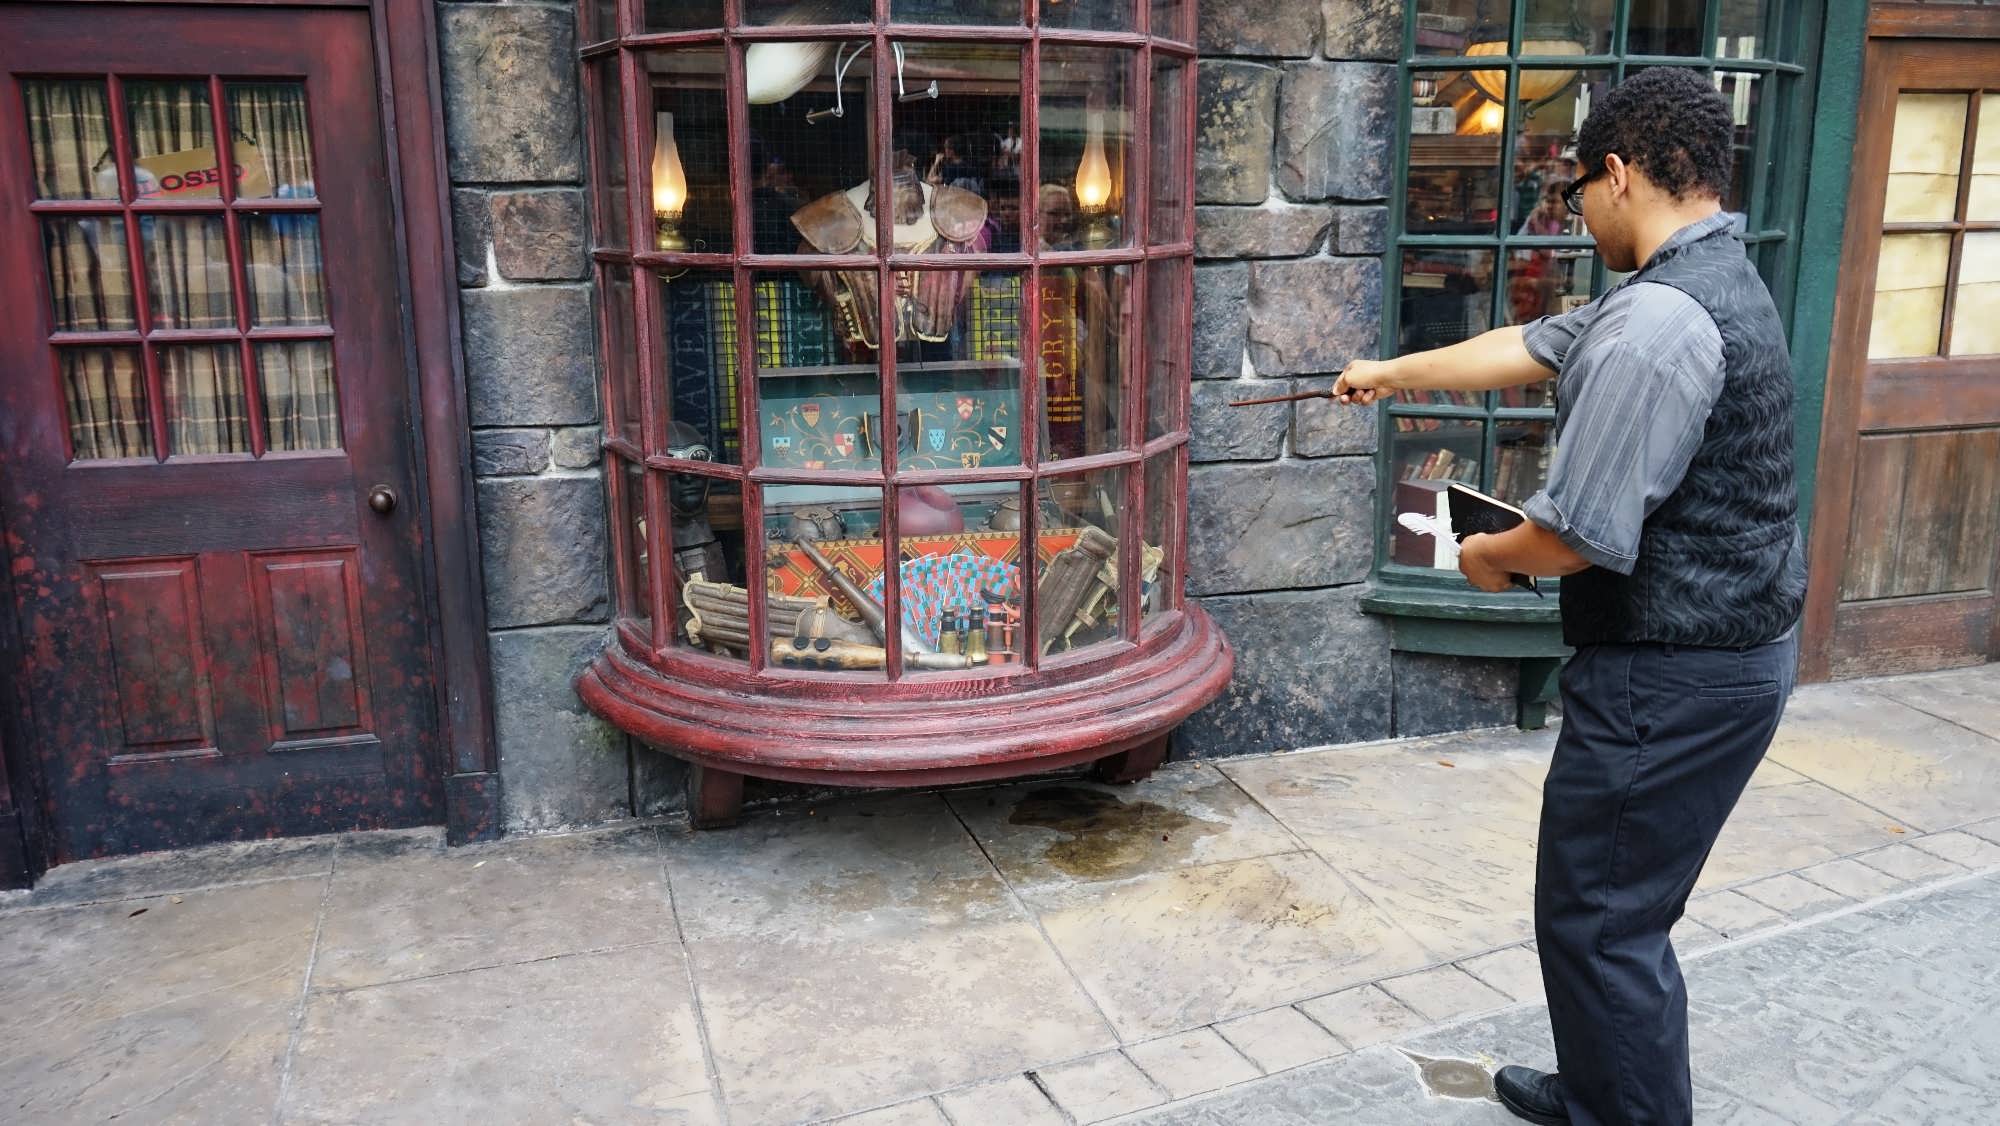 Spell Points in Hogsmeade - Hary Potter's Area at Islands of Adventure